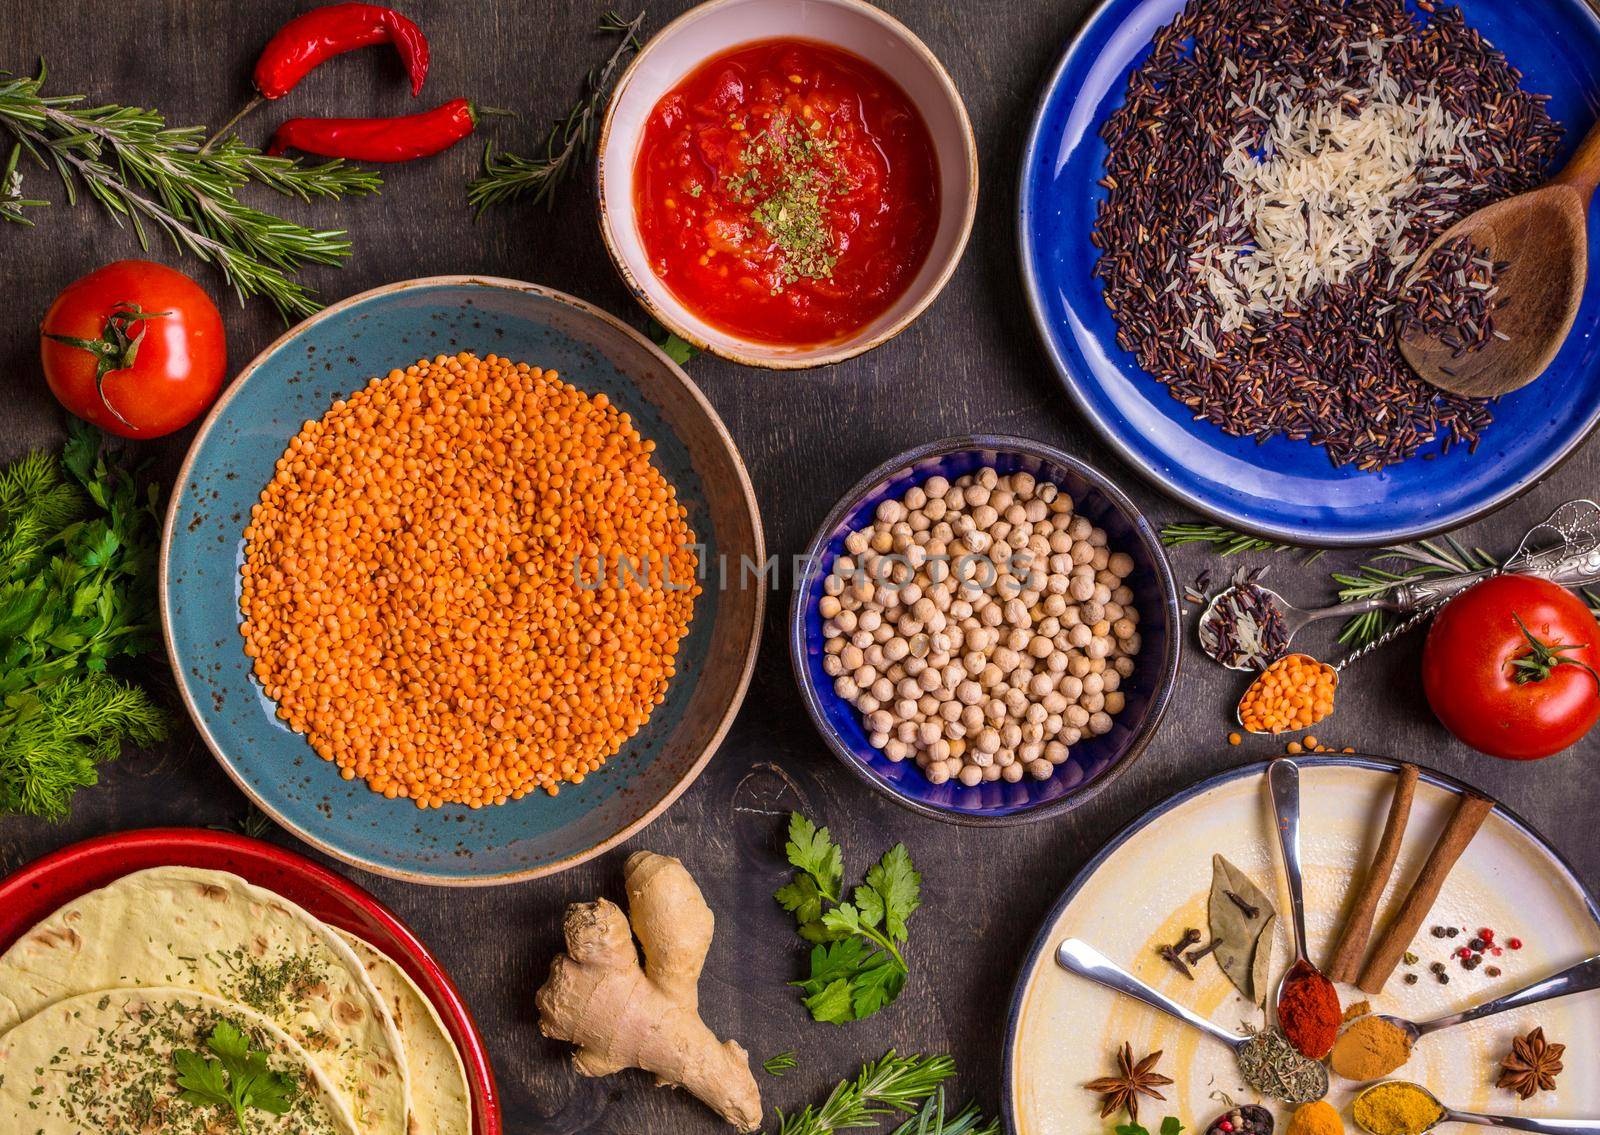 Table served with traditional for asian or eastern cuisine food. Cereal grains, beans, spices on colorful plates. Lentil, basmati and wild rice mix, chick-pea, tomato chutney, pita. Ingredients for indian or eastern food